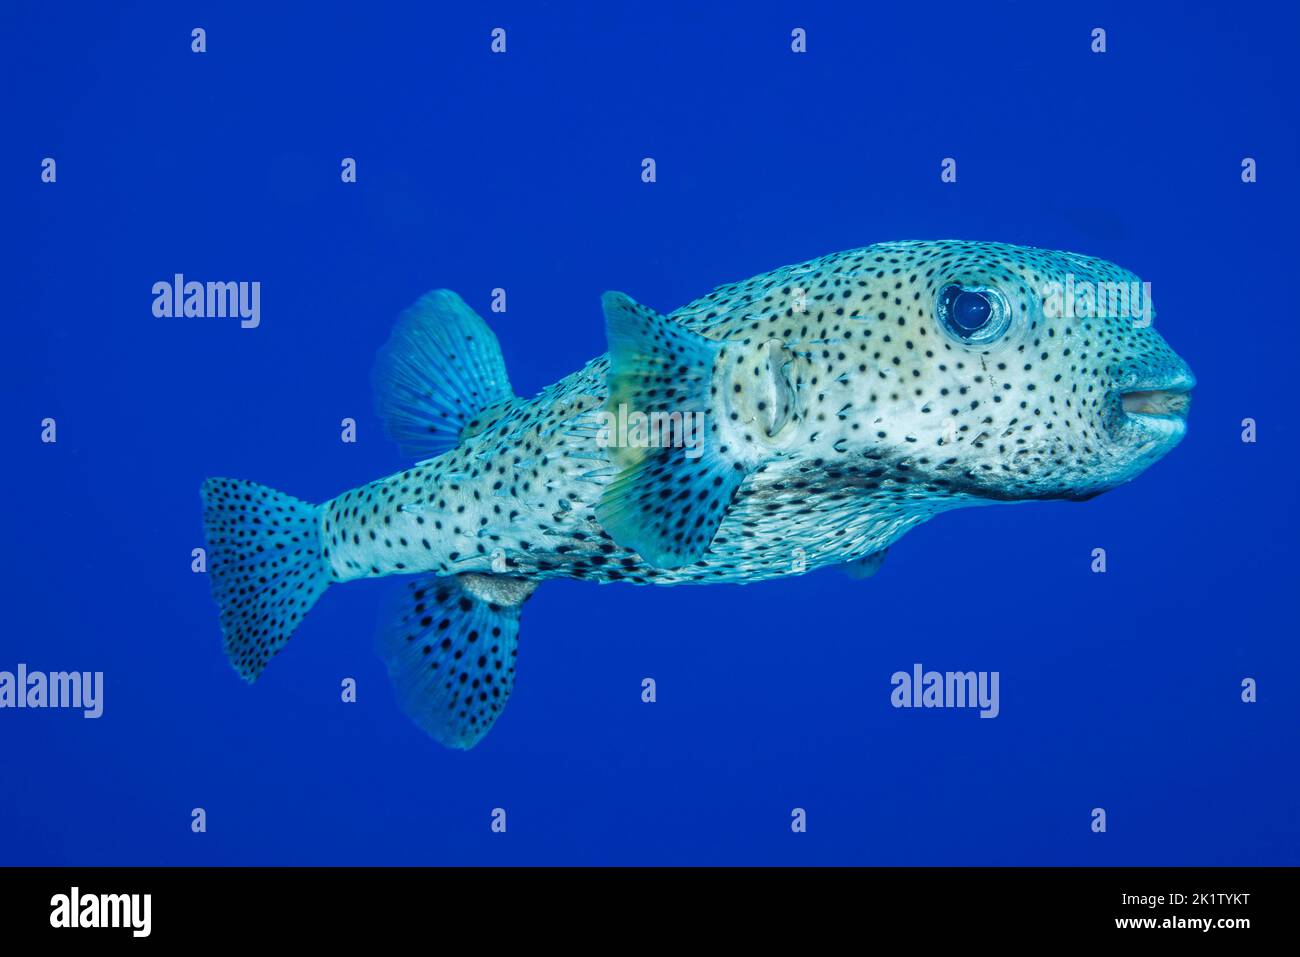 The spotted porcupinefish, Diodon hystrix, feed primarily at night on hard shelled invertebrates, Hawaii. Stock Photo